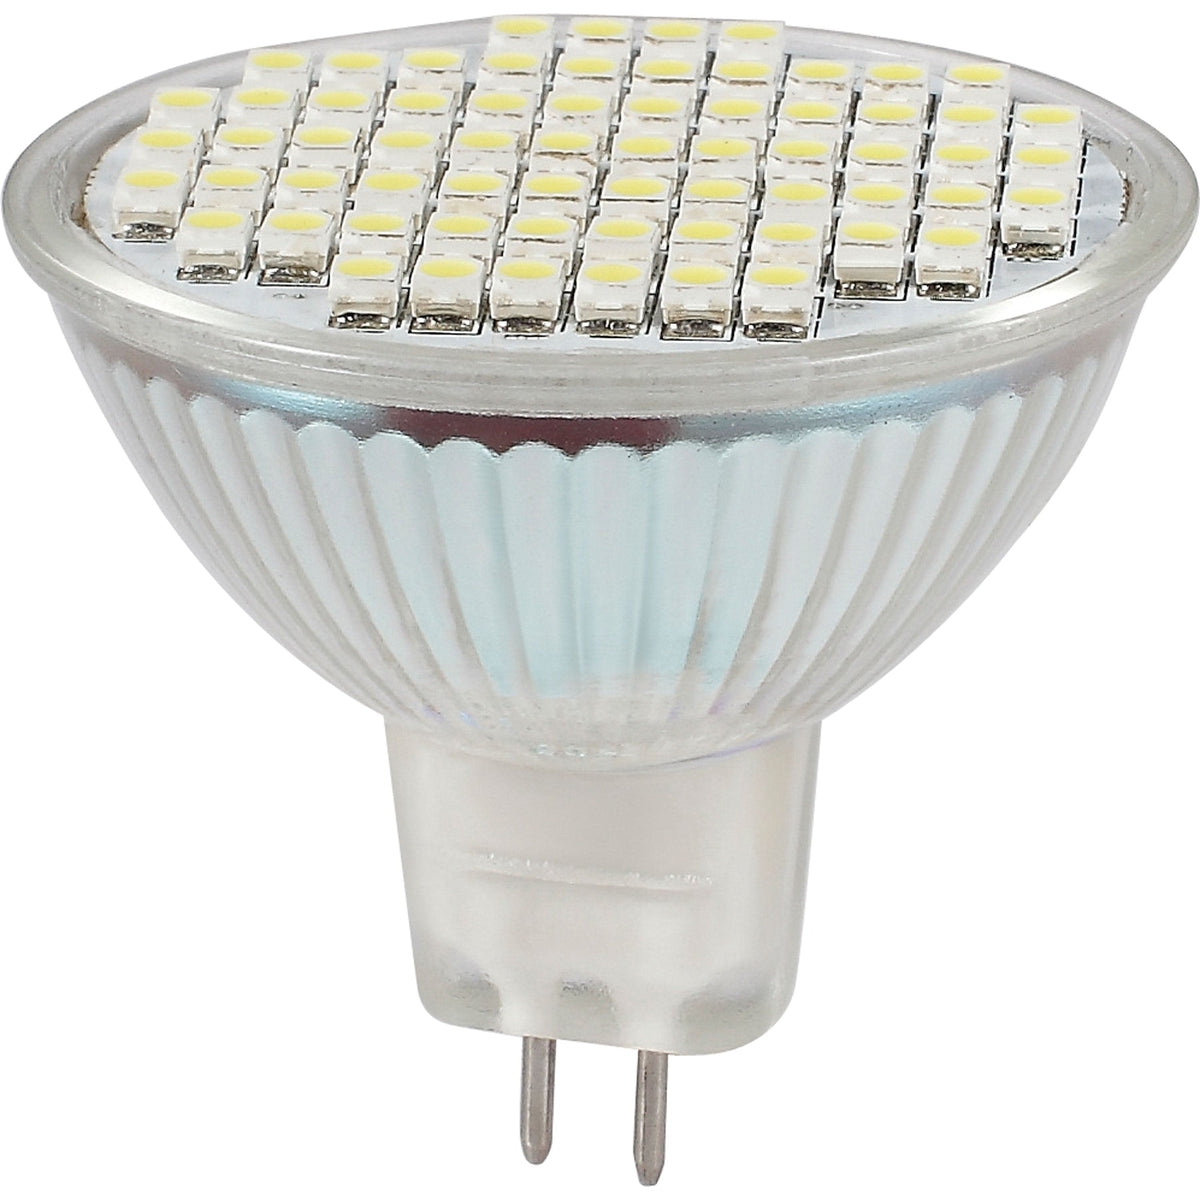 Ming's Mark Qualifies for Free Shipping Ming's Mark LED Bulb MR16 Base #3528104